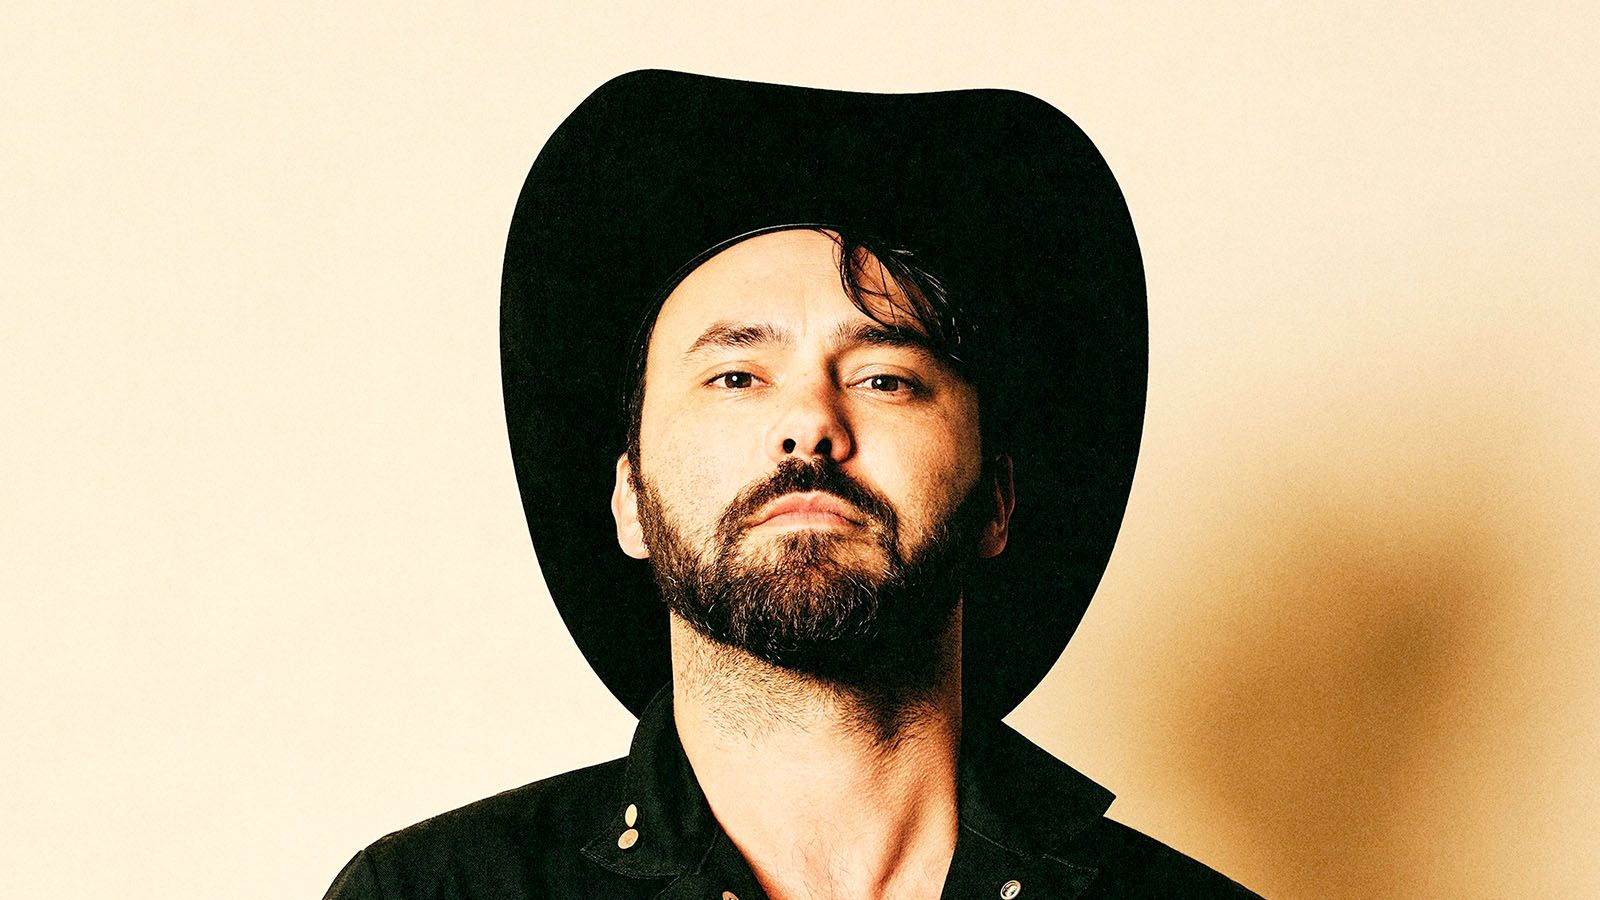 Shakey Graves will be at Sweetwater Performance Pavilion on May 9.